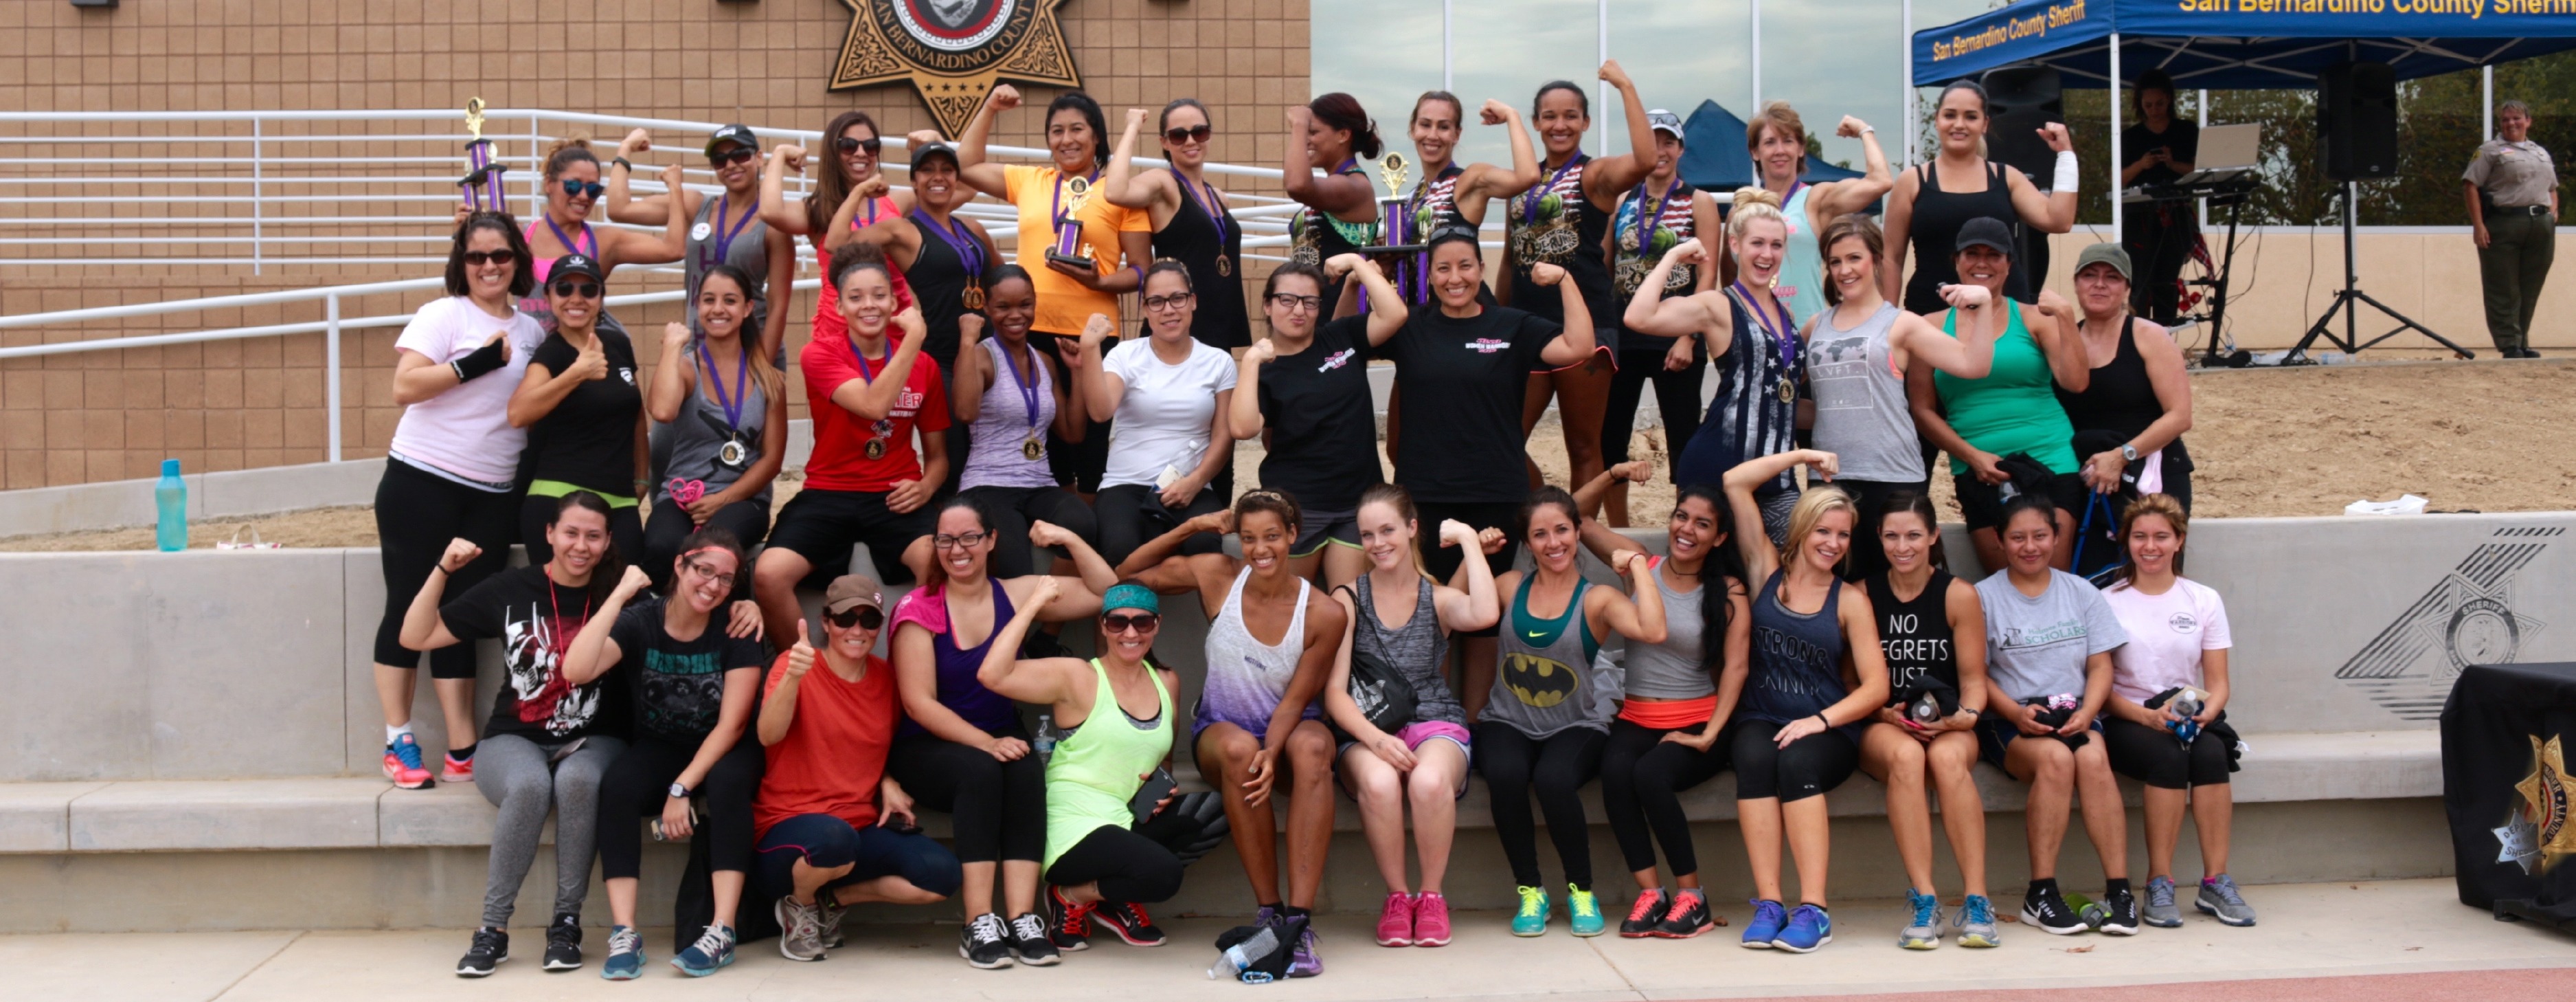 2015 Women Warriors Health and Fitness Event